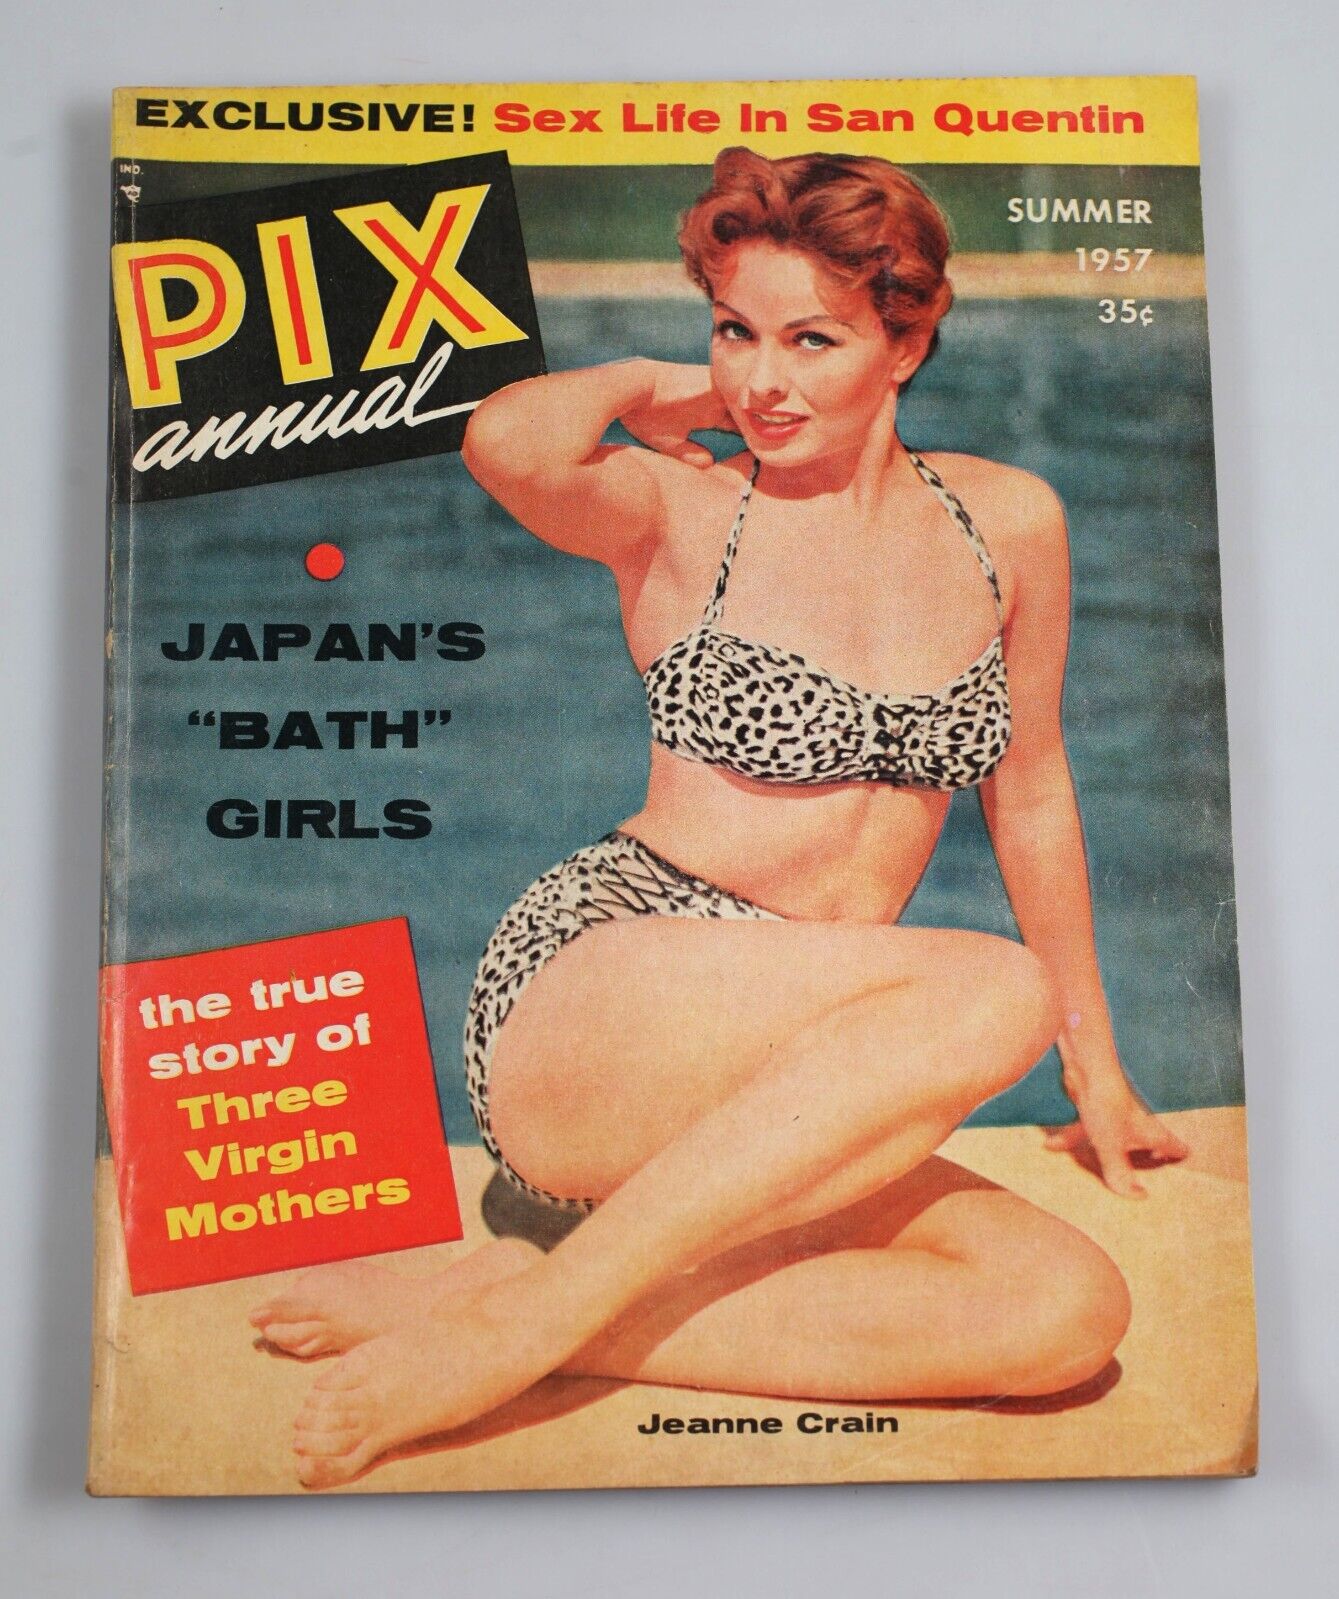 Vintage Cheesecake Pinup Magazine Pix Annual Summer 1957 Sex Life in San Quentin